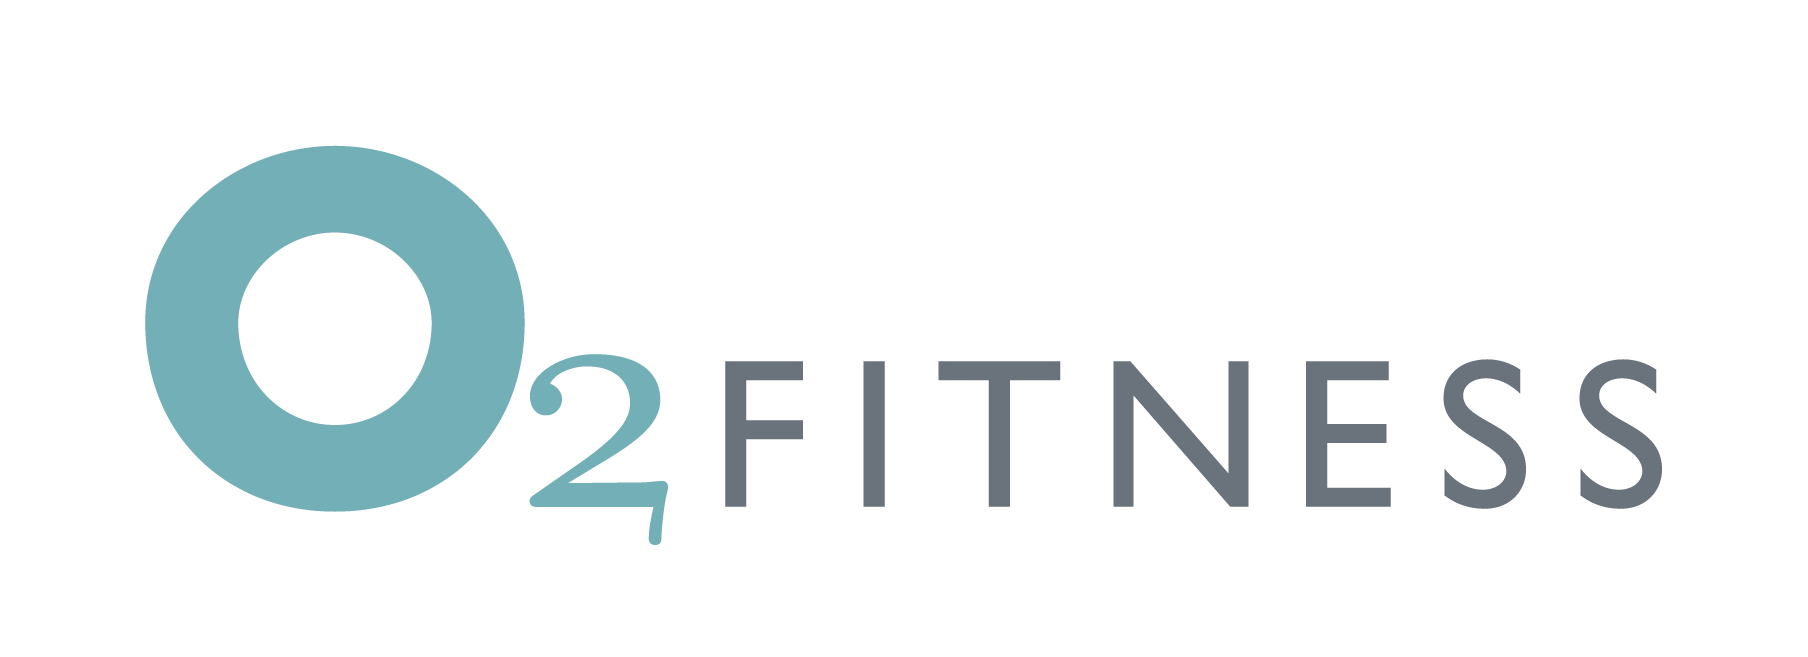 MSN Fitness Logo - O2 Fitness Clubs | Gyms, Personal Training and Group Fitness Classes